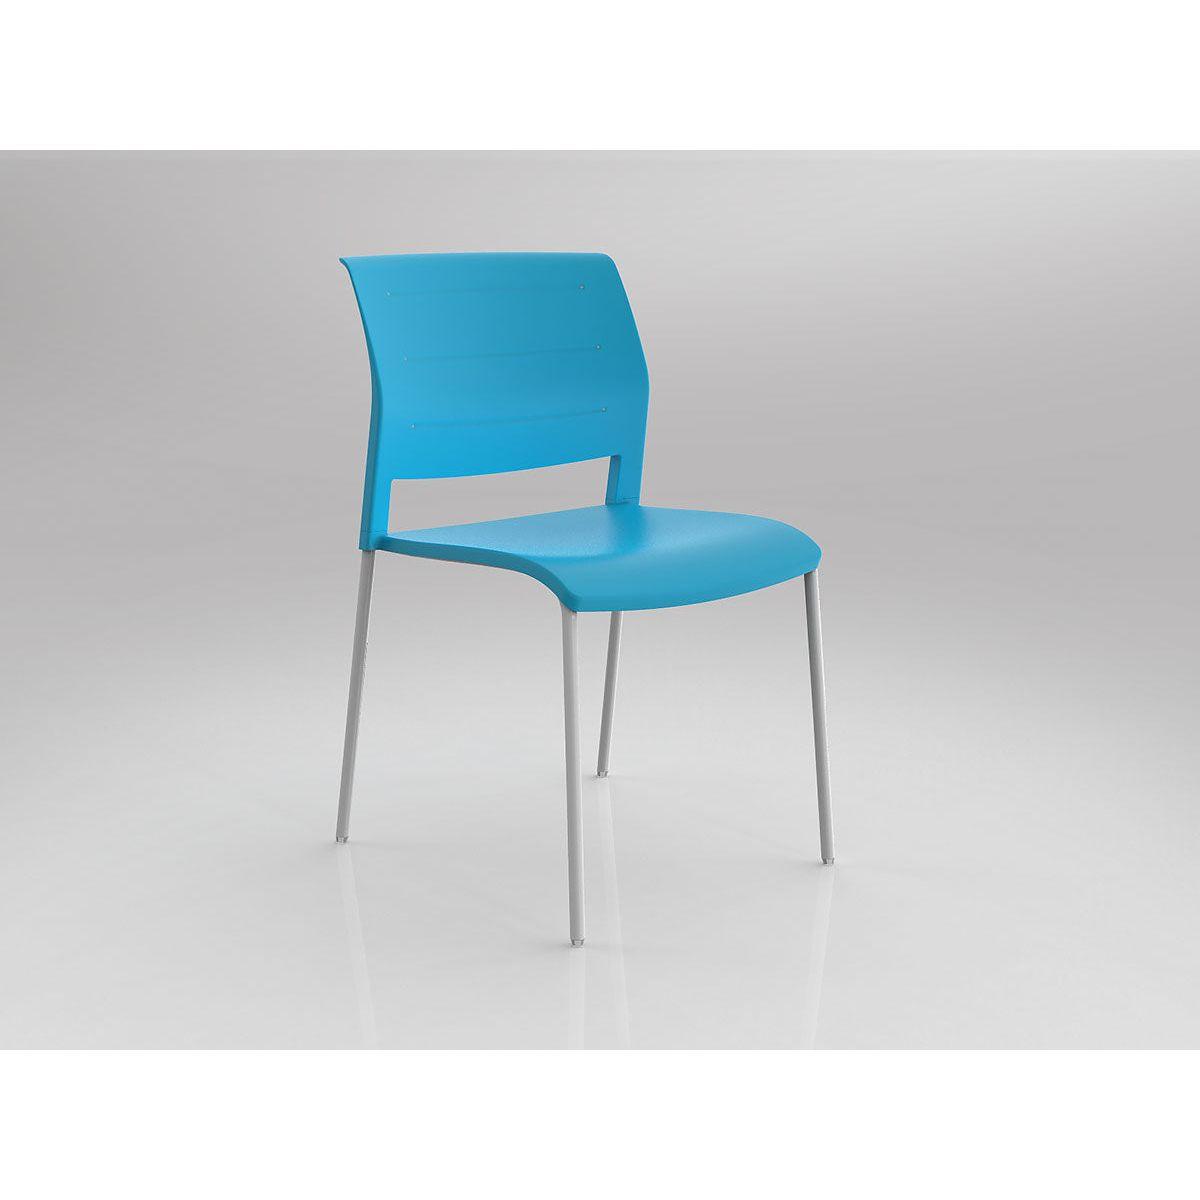 Game Chair PP Seat and Back - Office Furniture Company 